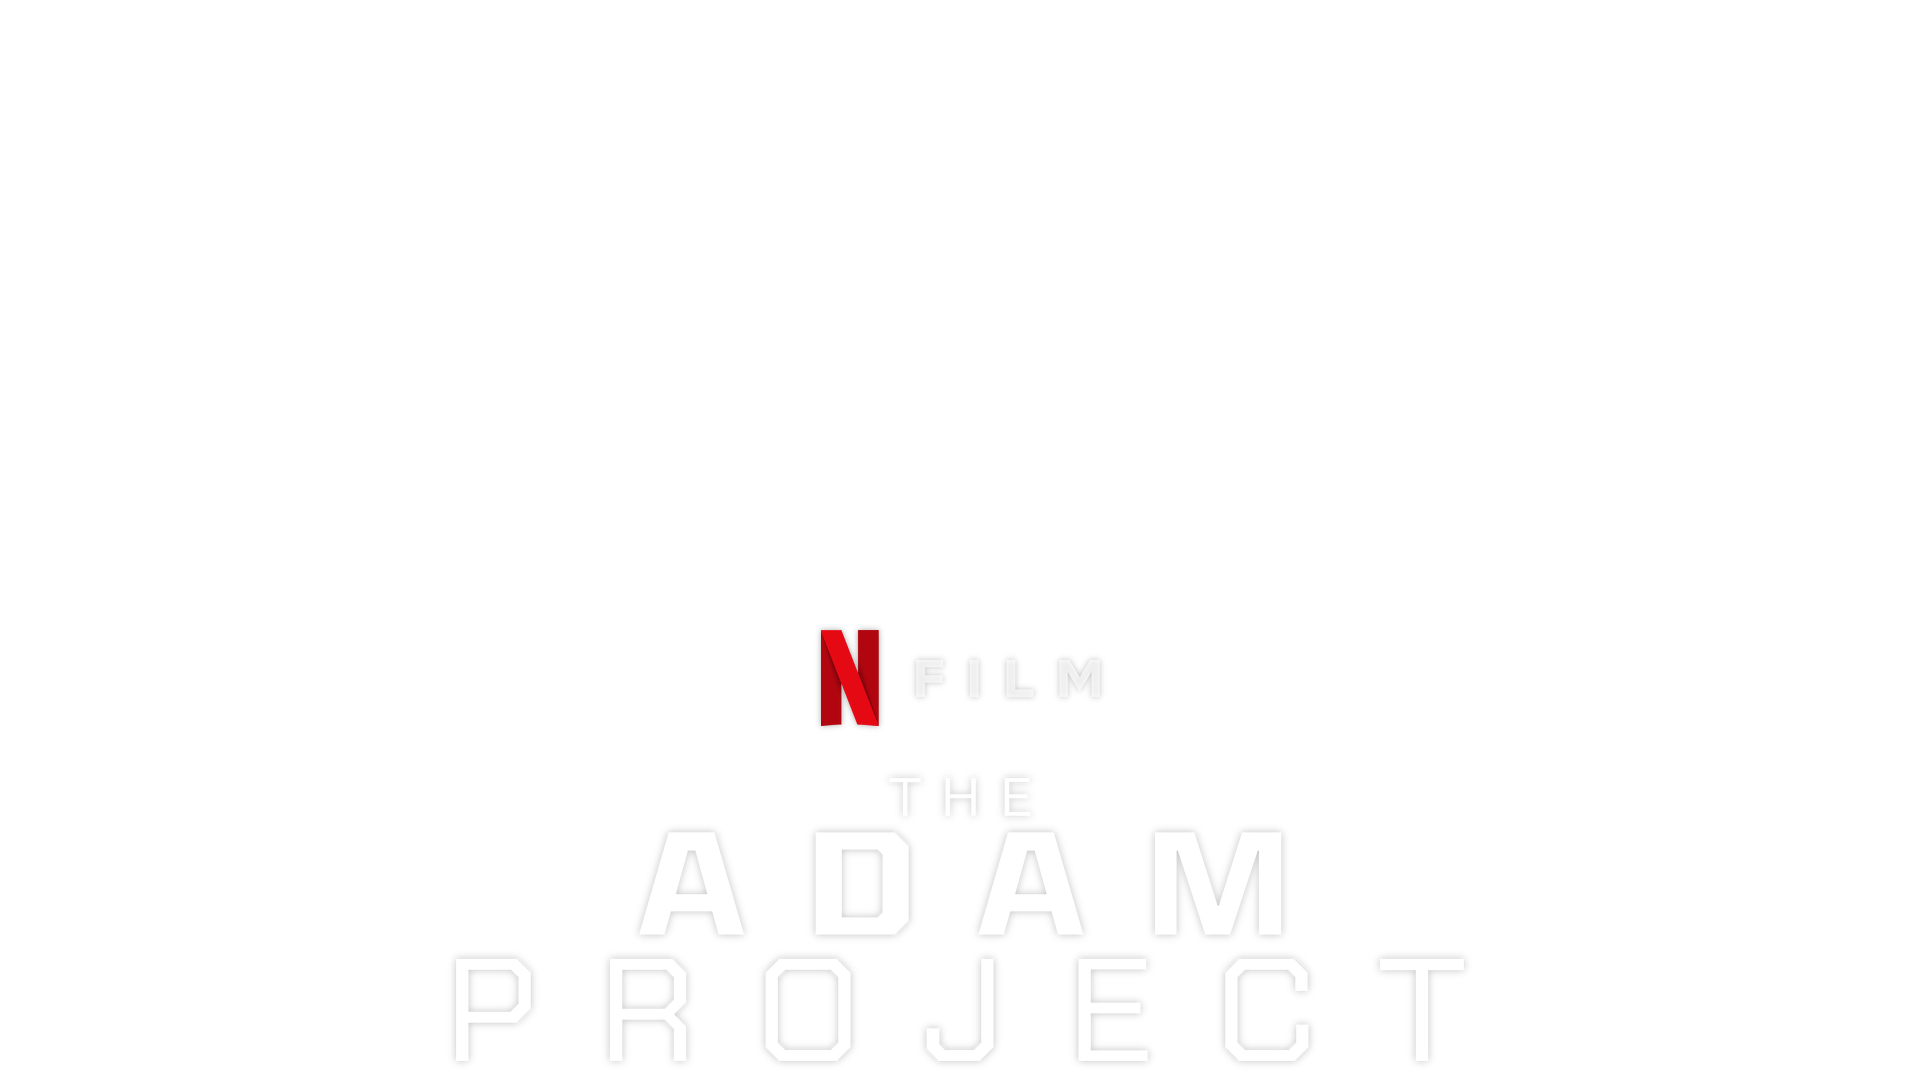 Everything You Need to Know About 'The Adam Project' - Netflix Tudum